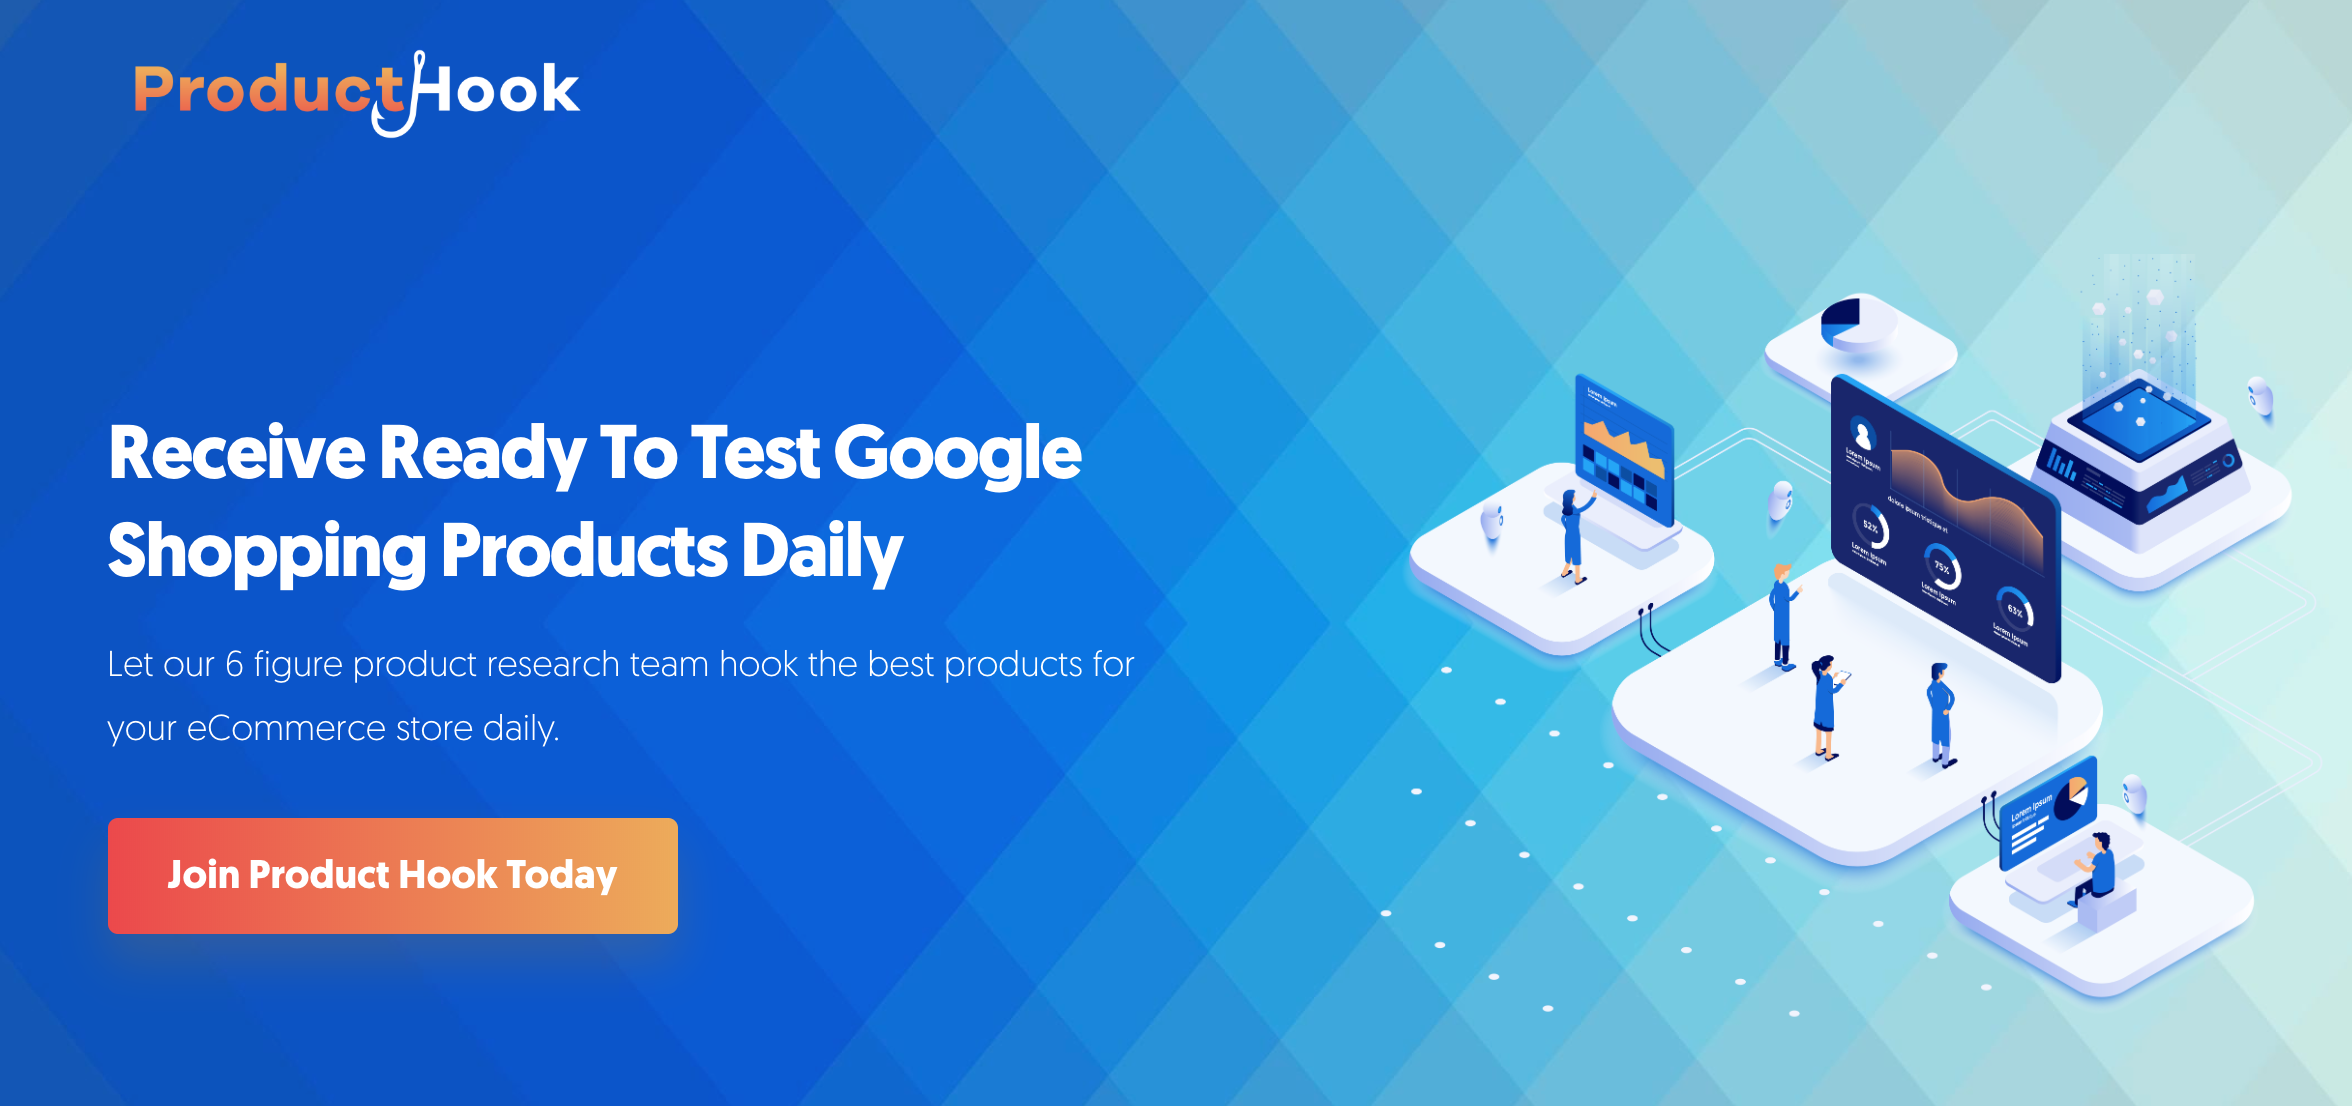 ProductHook - Daily Dropshipping Product Research for Google Shopping